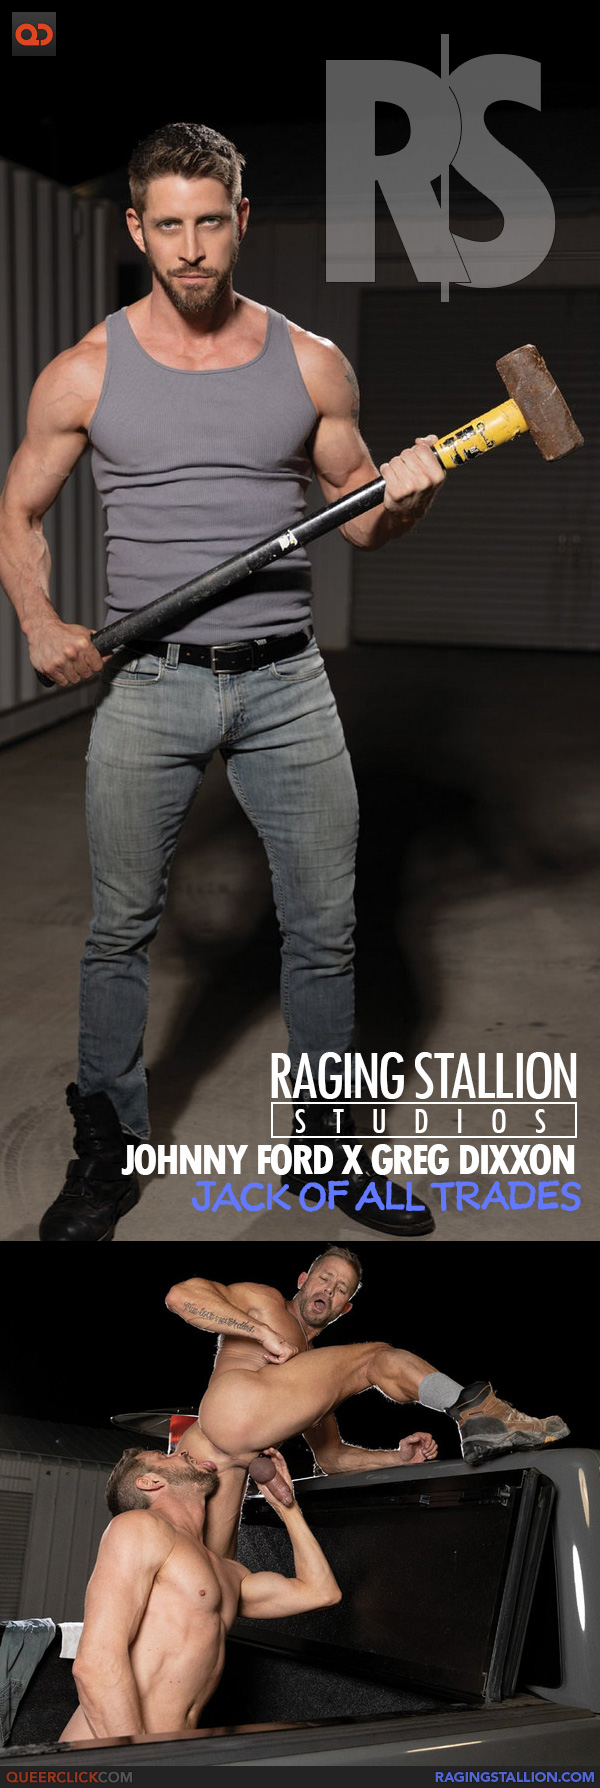 Raging Stallion: Johnny Ford and Greg Dixxon - Jack Of All Trades